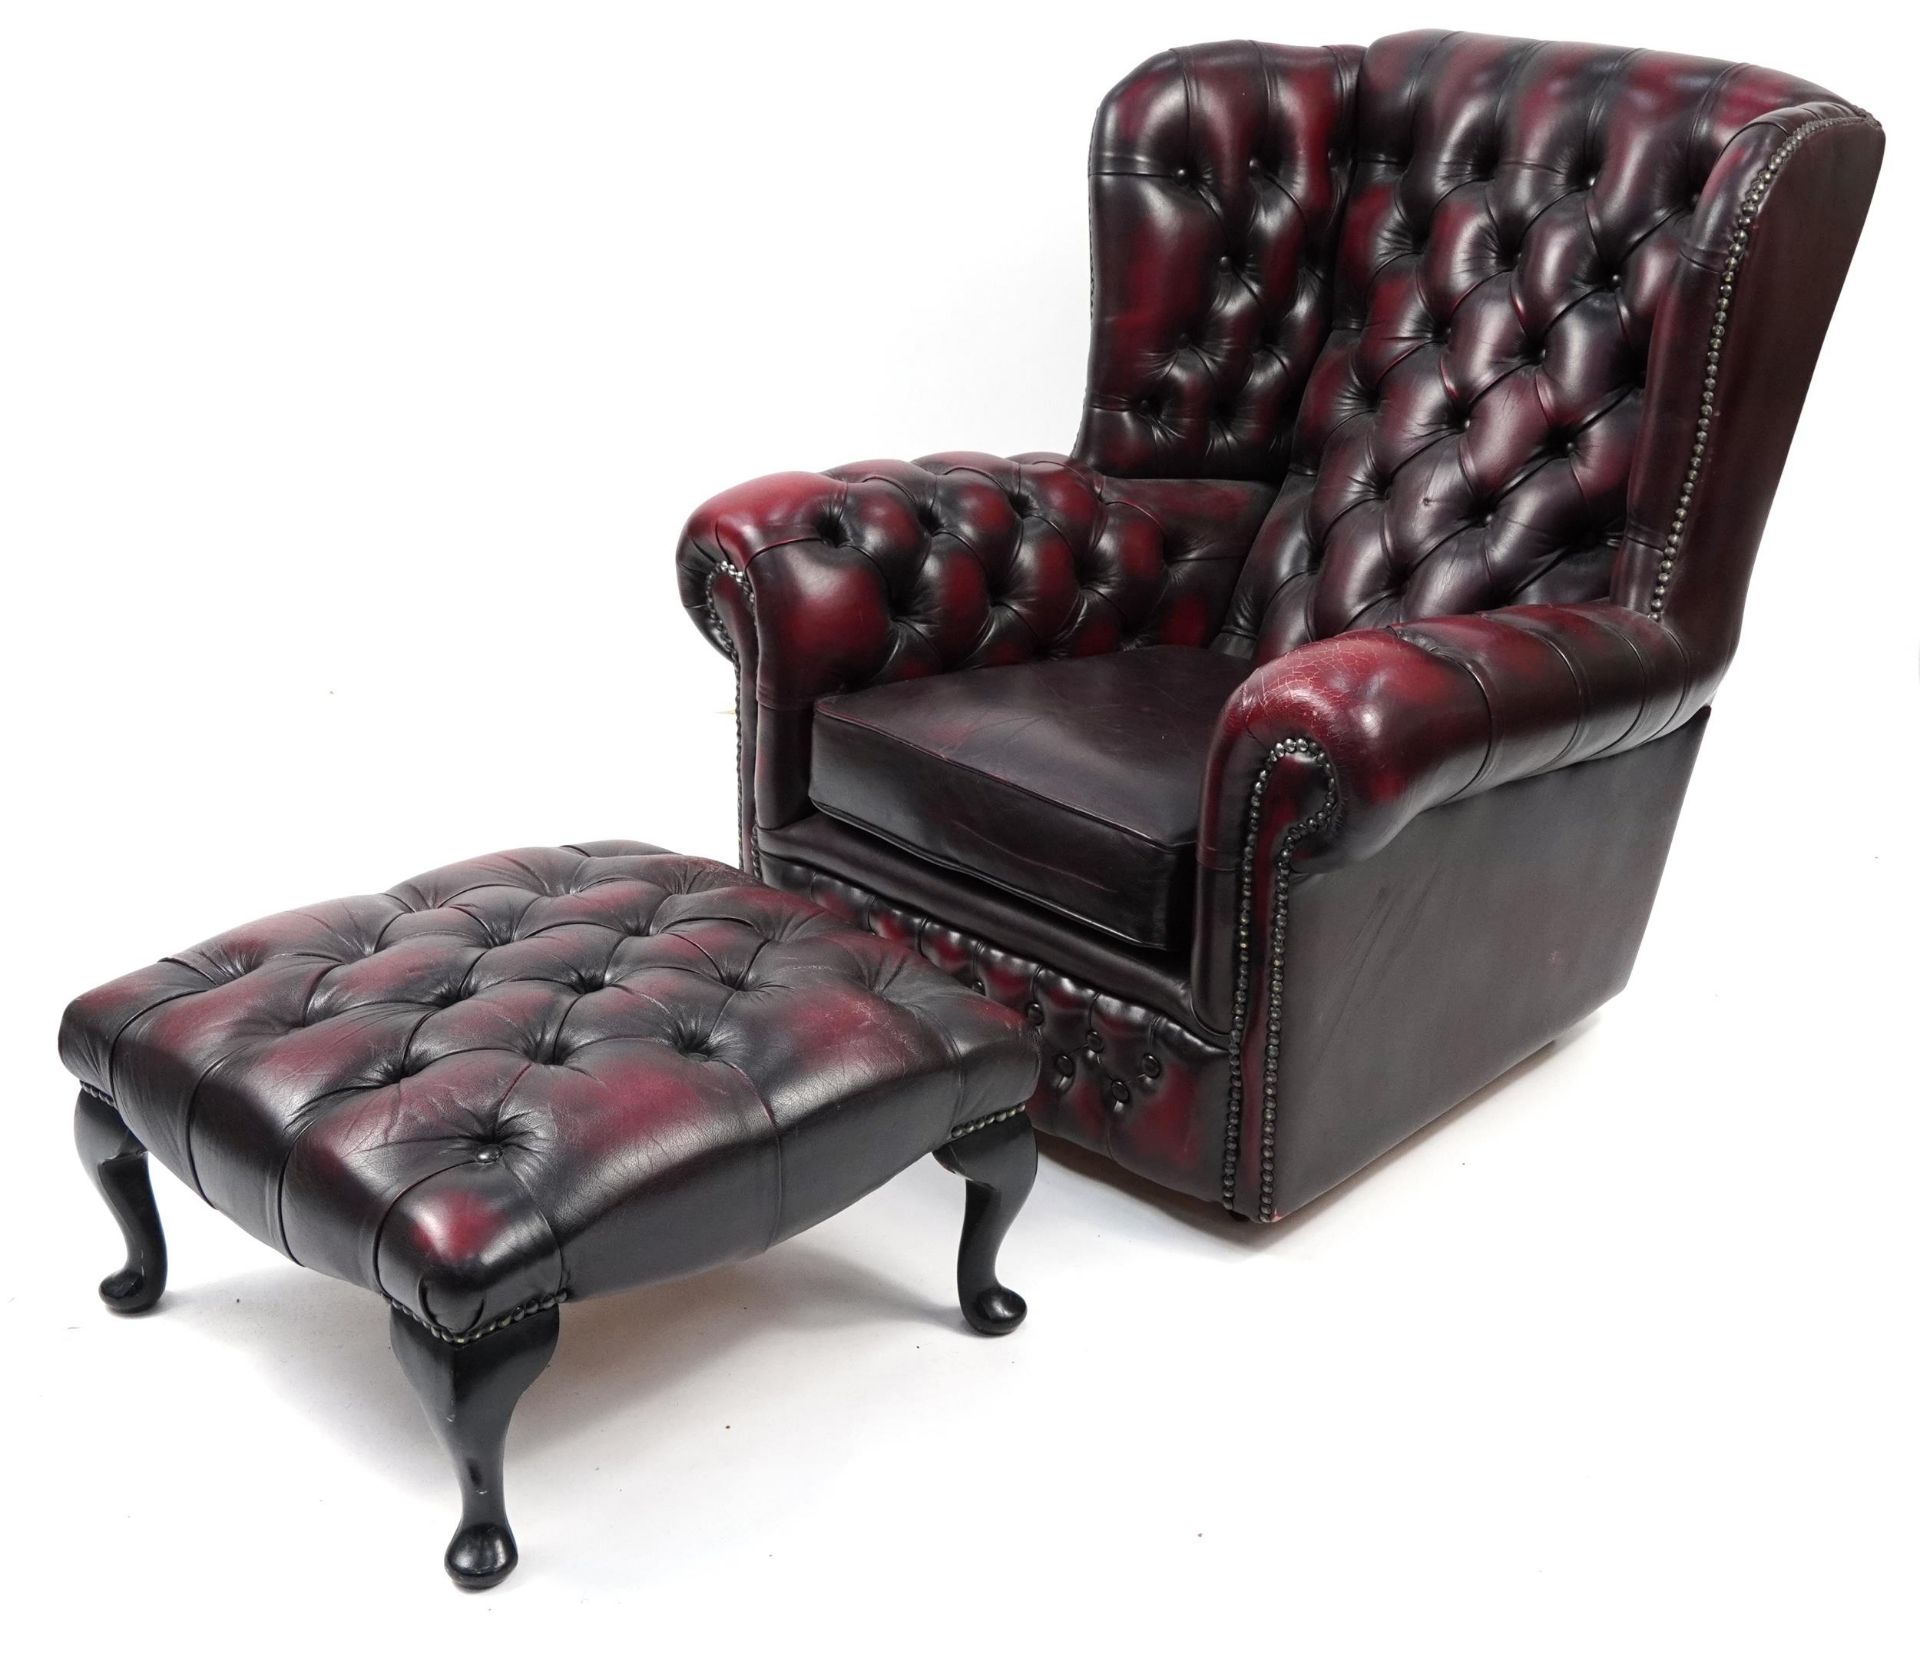 Oxblood leather button back wingback armchair with similar footstool, 91cm high